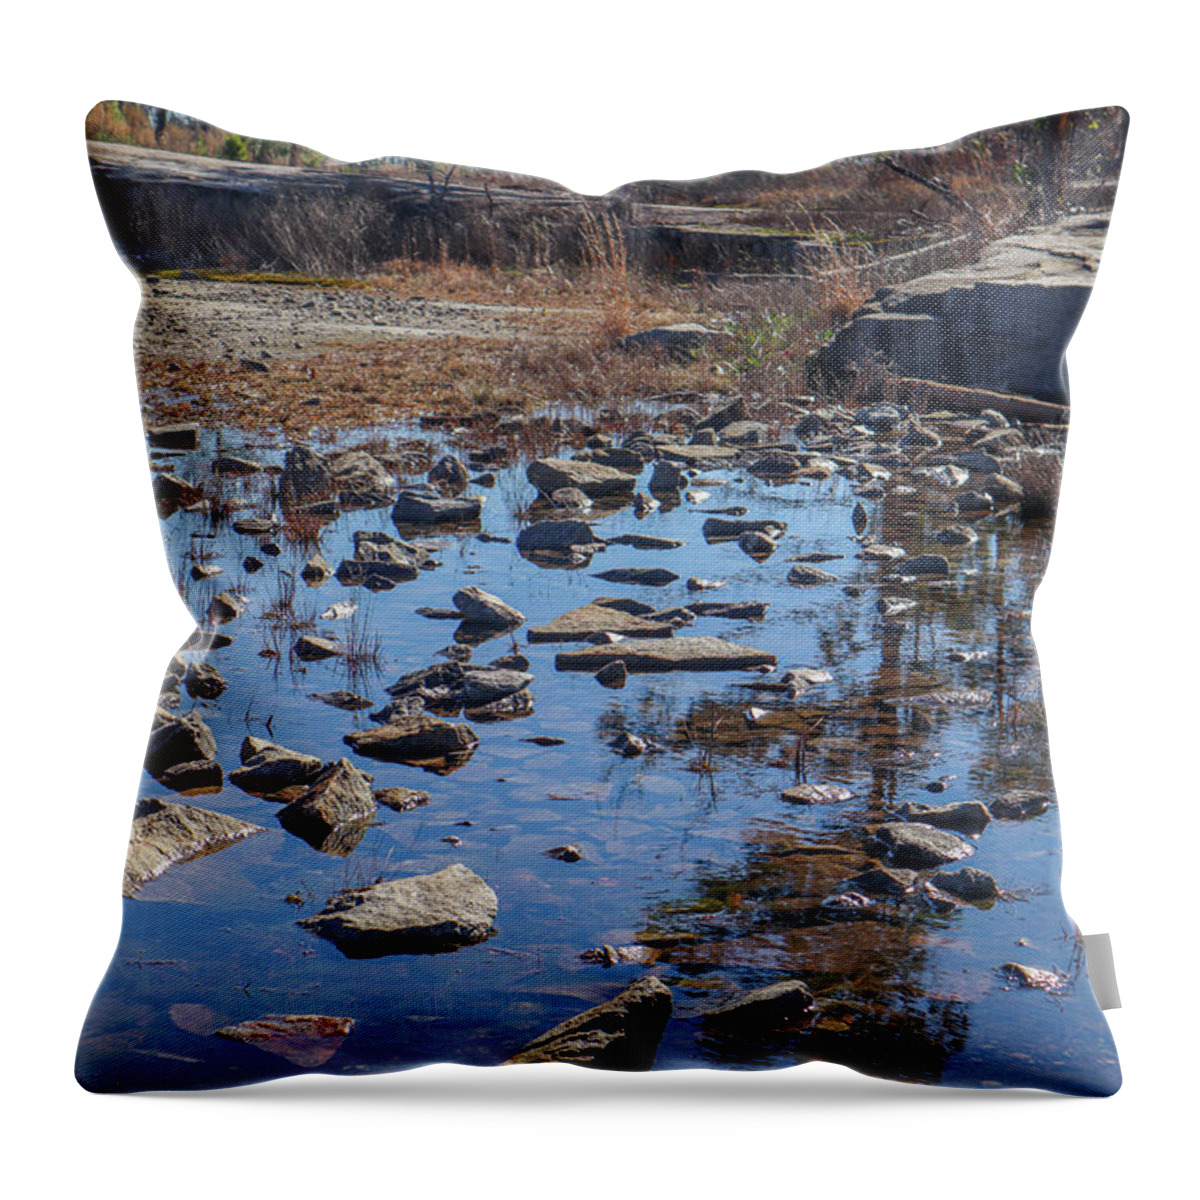 Arabia Mountain Throw Pillow featuring the photograph A Granite Rocks Pool by Ed Williams